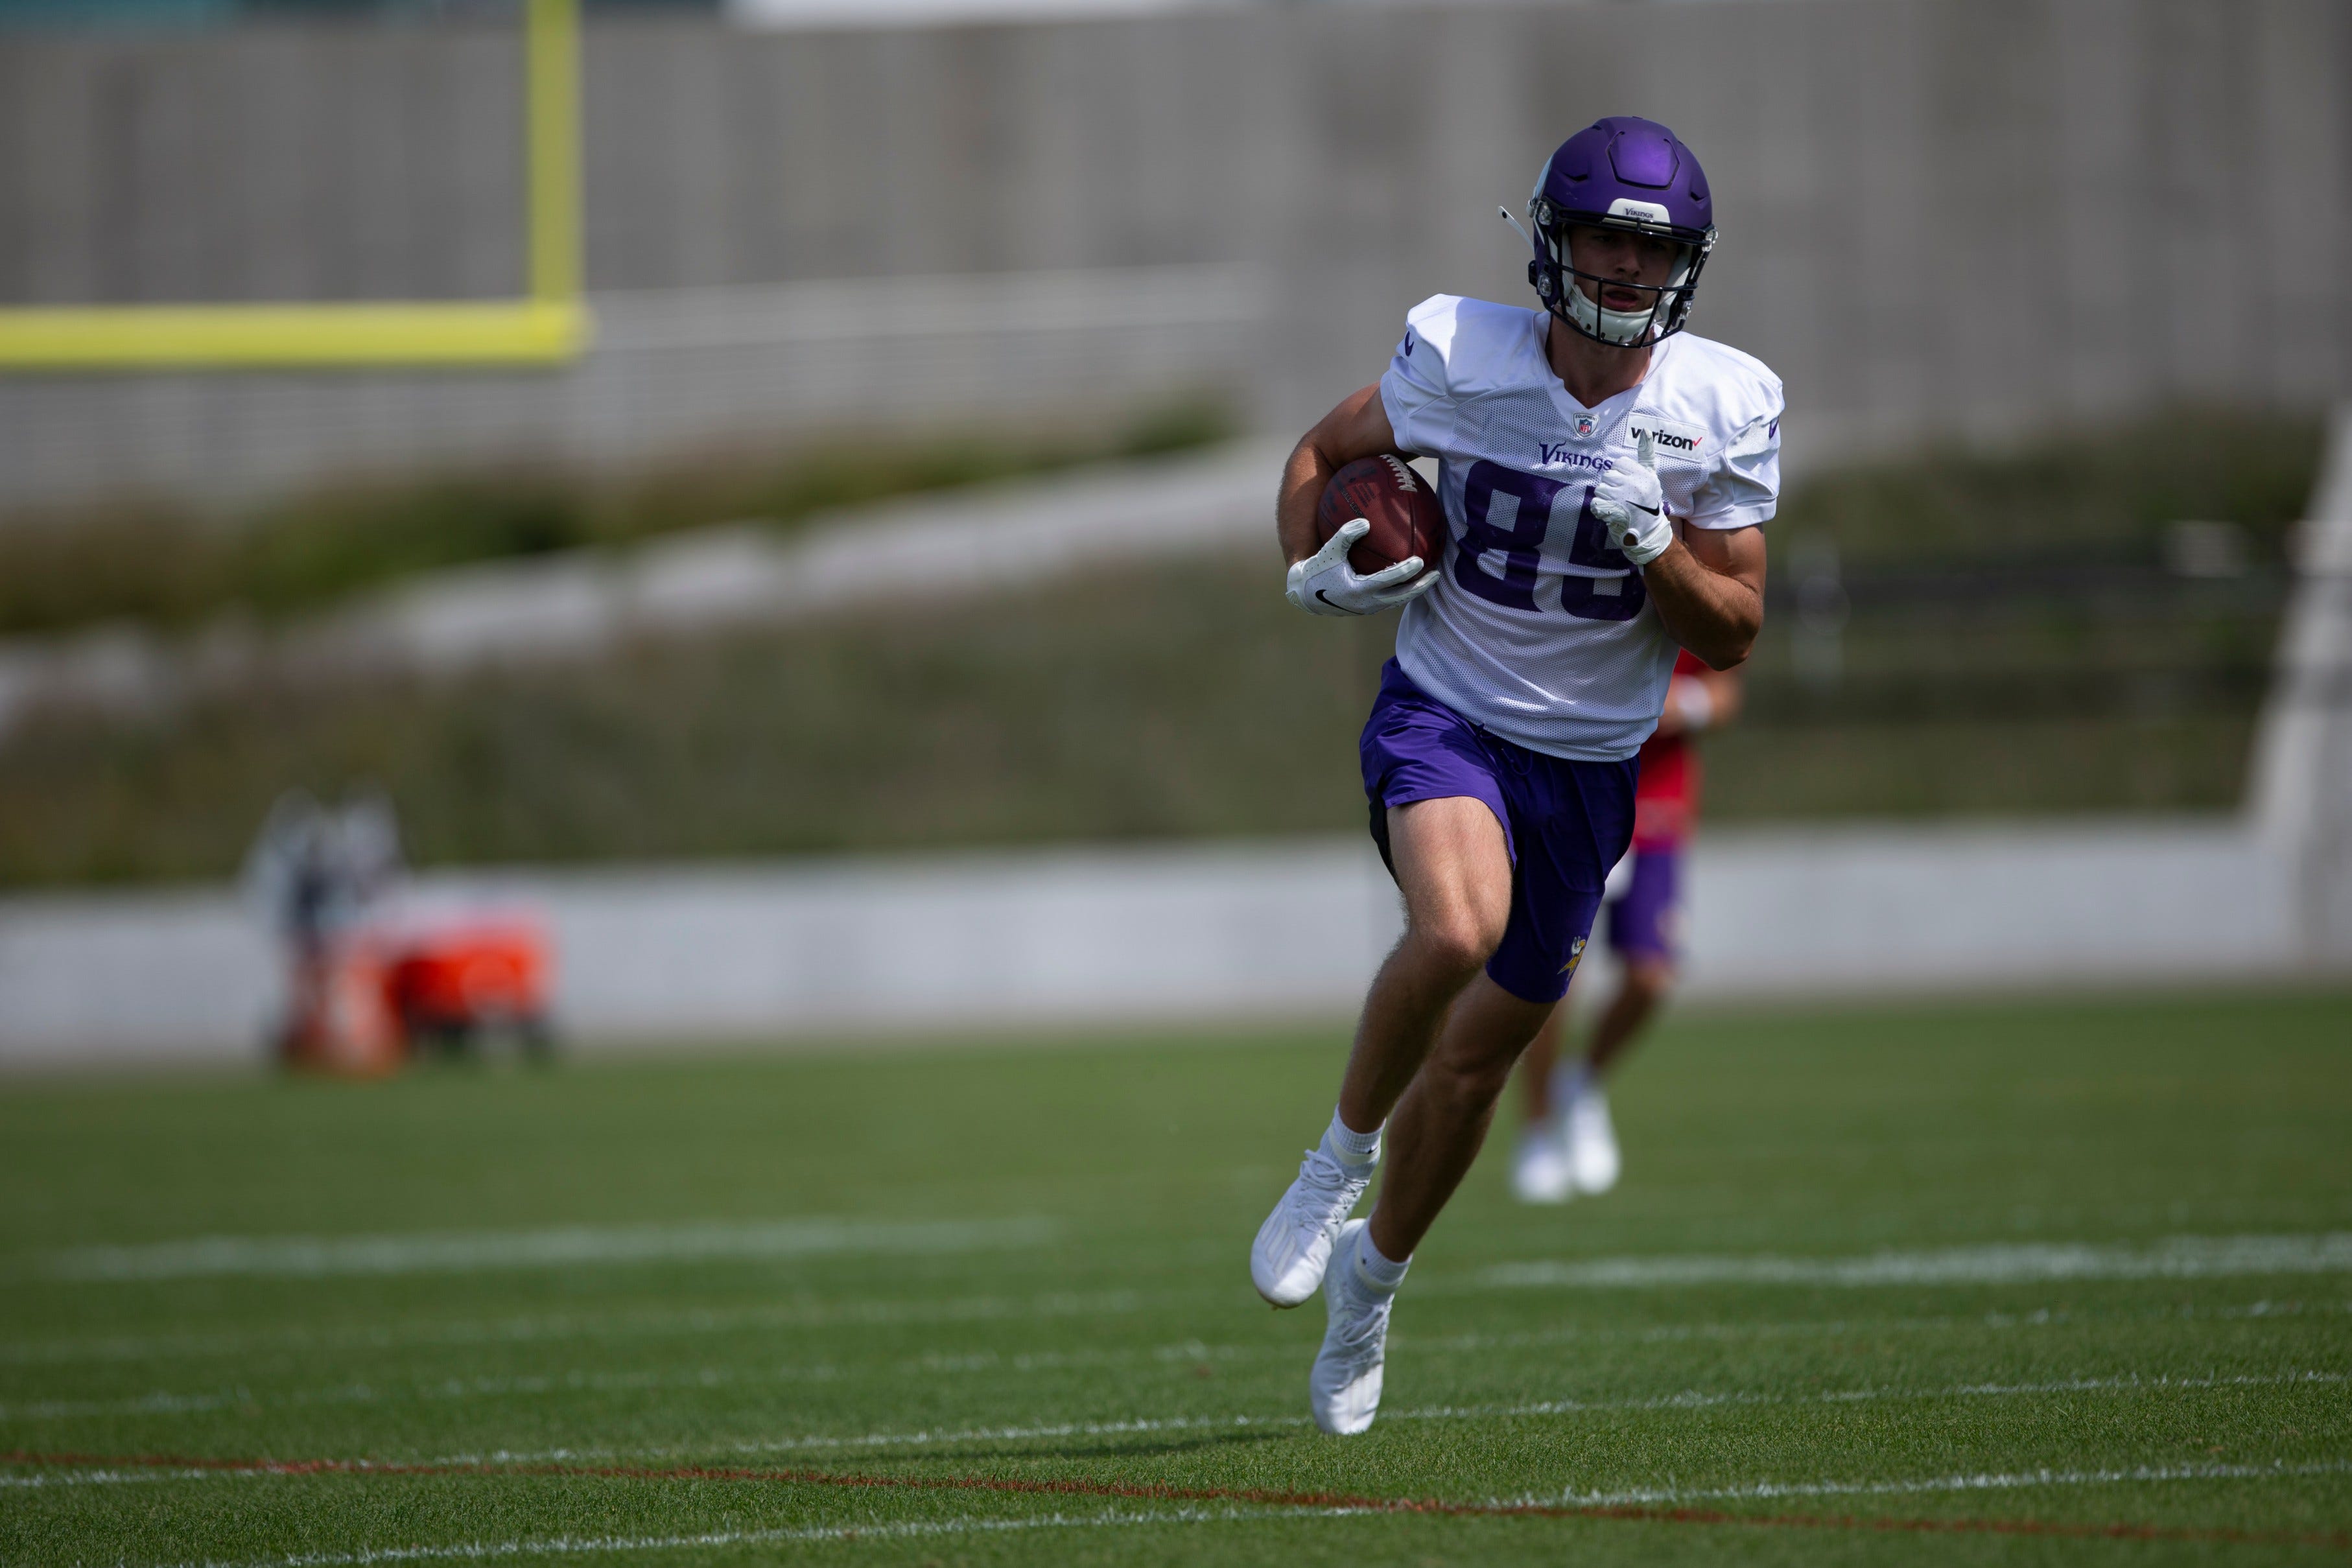 Need for speed: Will the Vikings get their fast, young playmakers